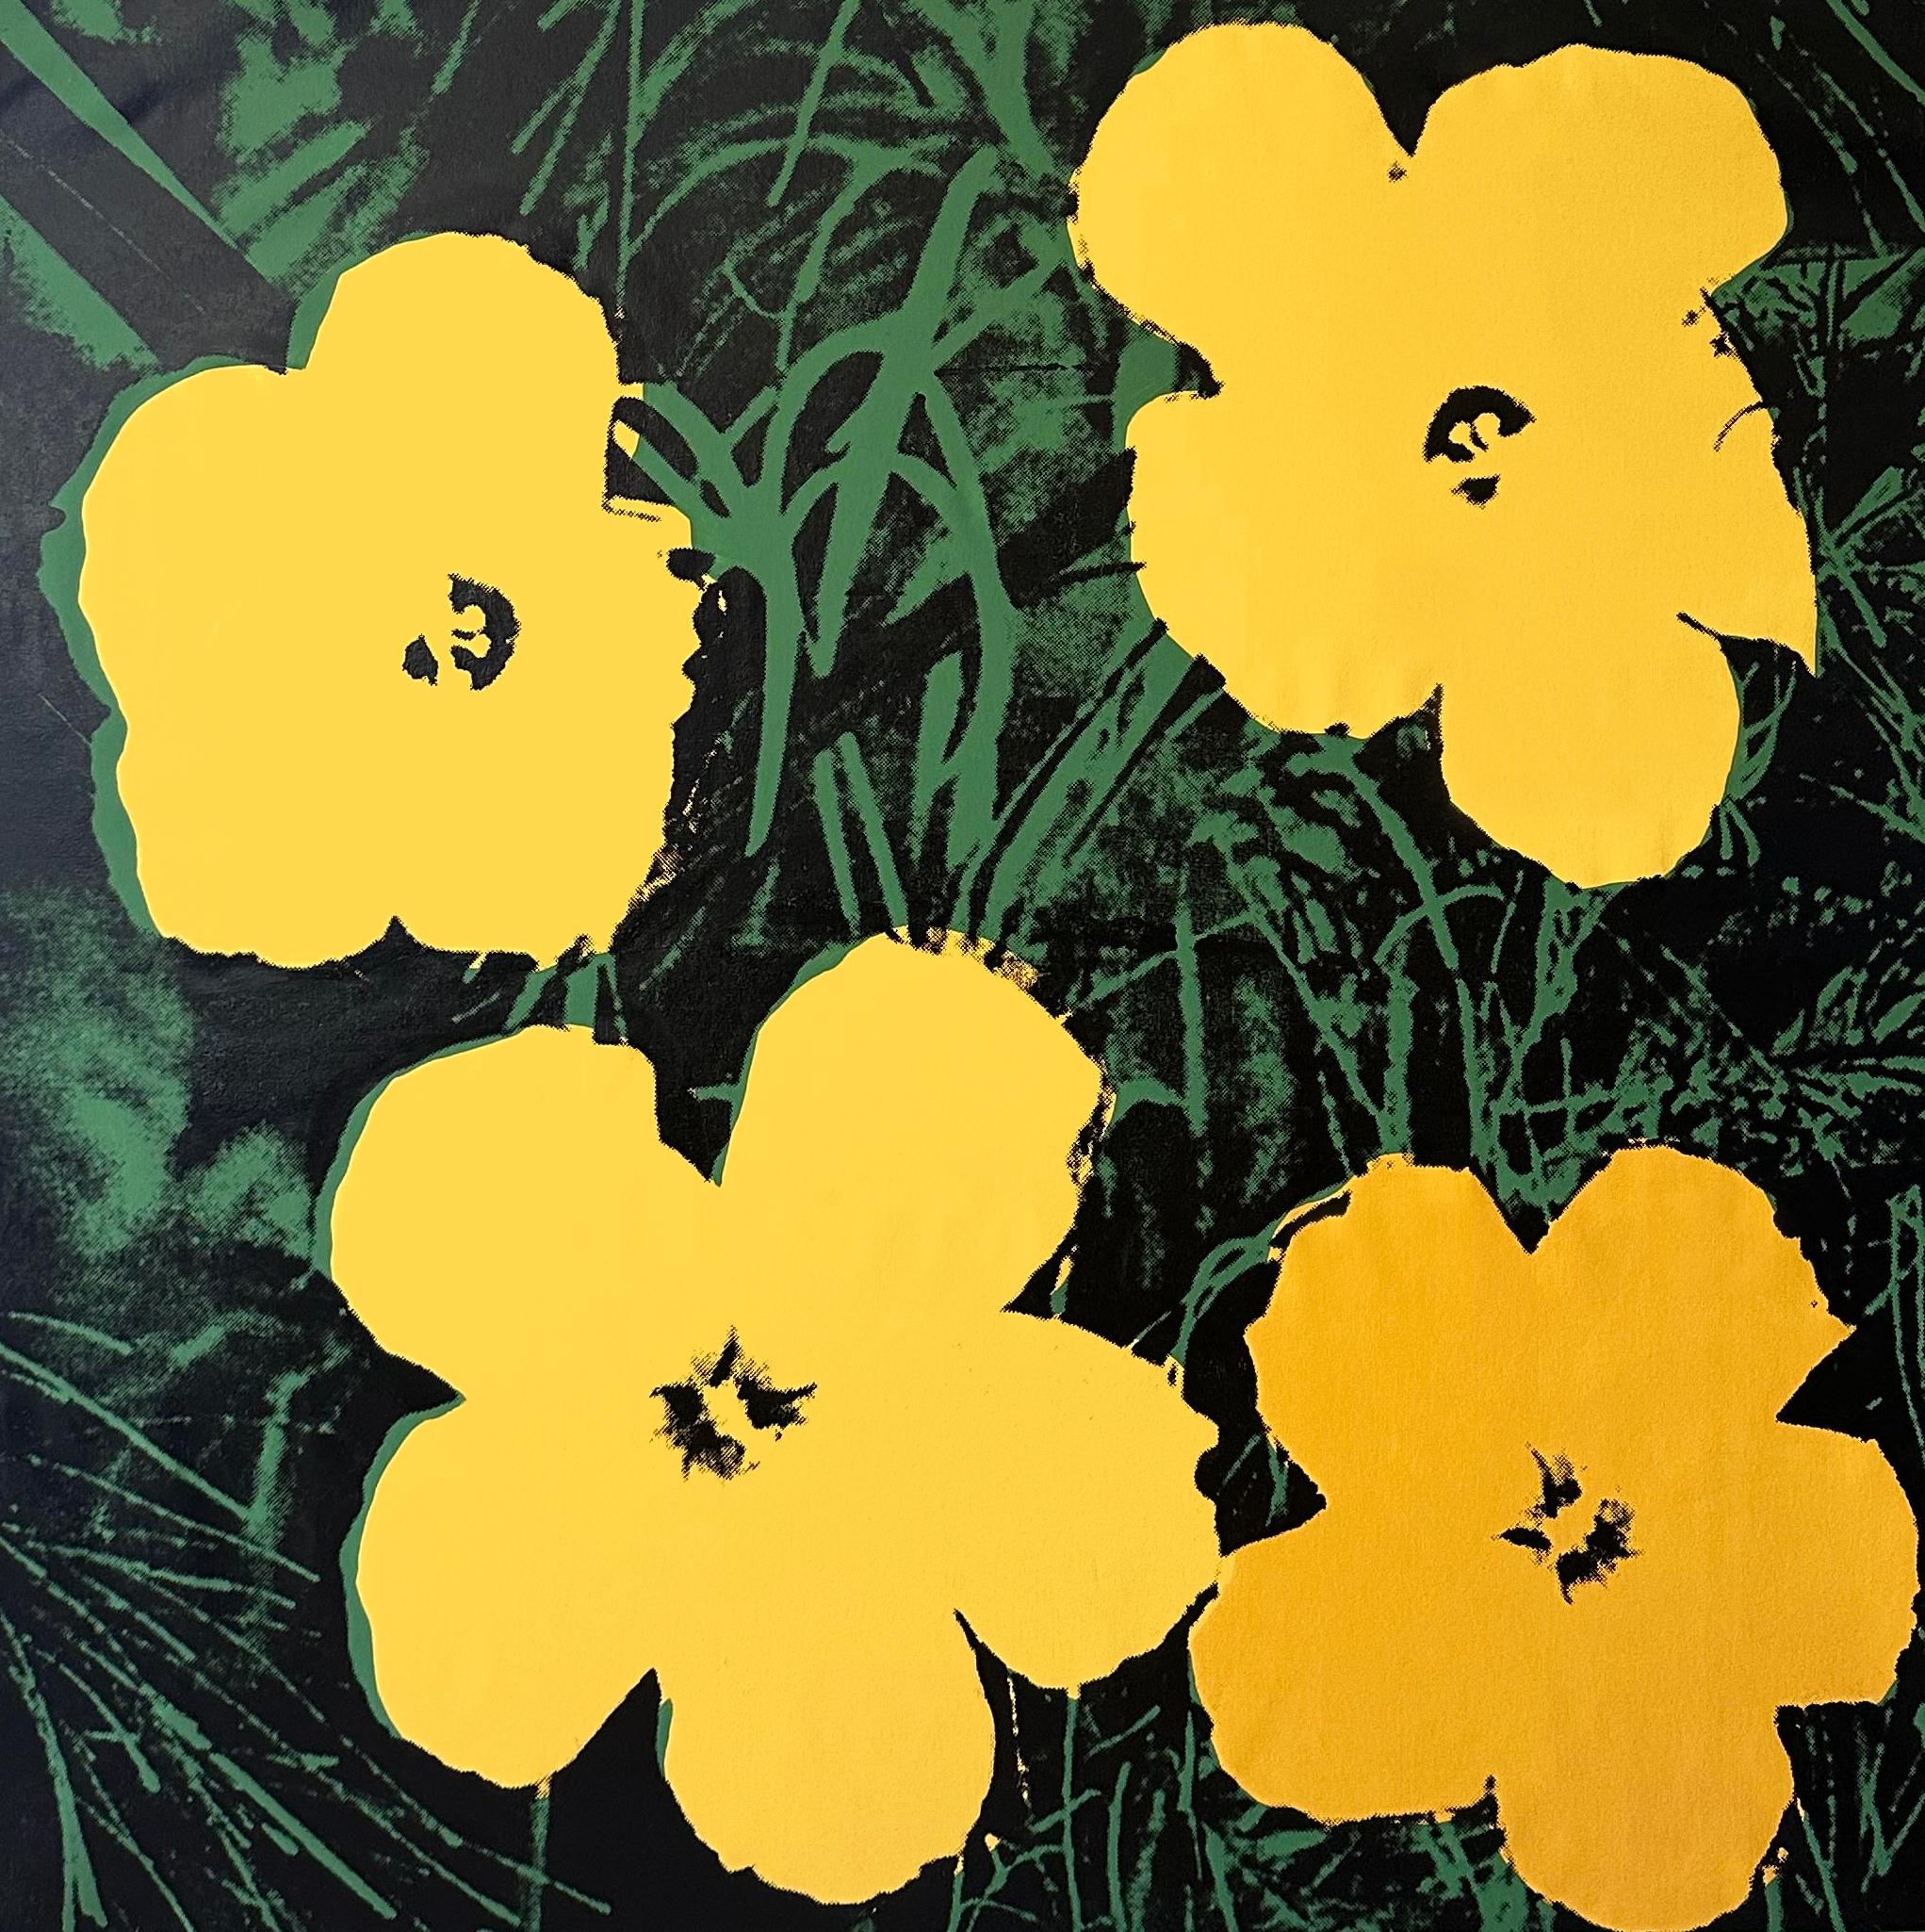 Denied Andy Warhol Flowers Yellow 48 x48" canvas Pop Art Painting Charles Lutz